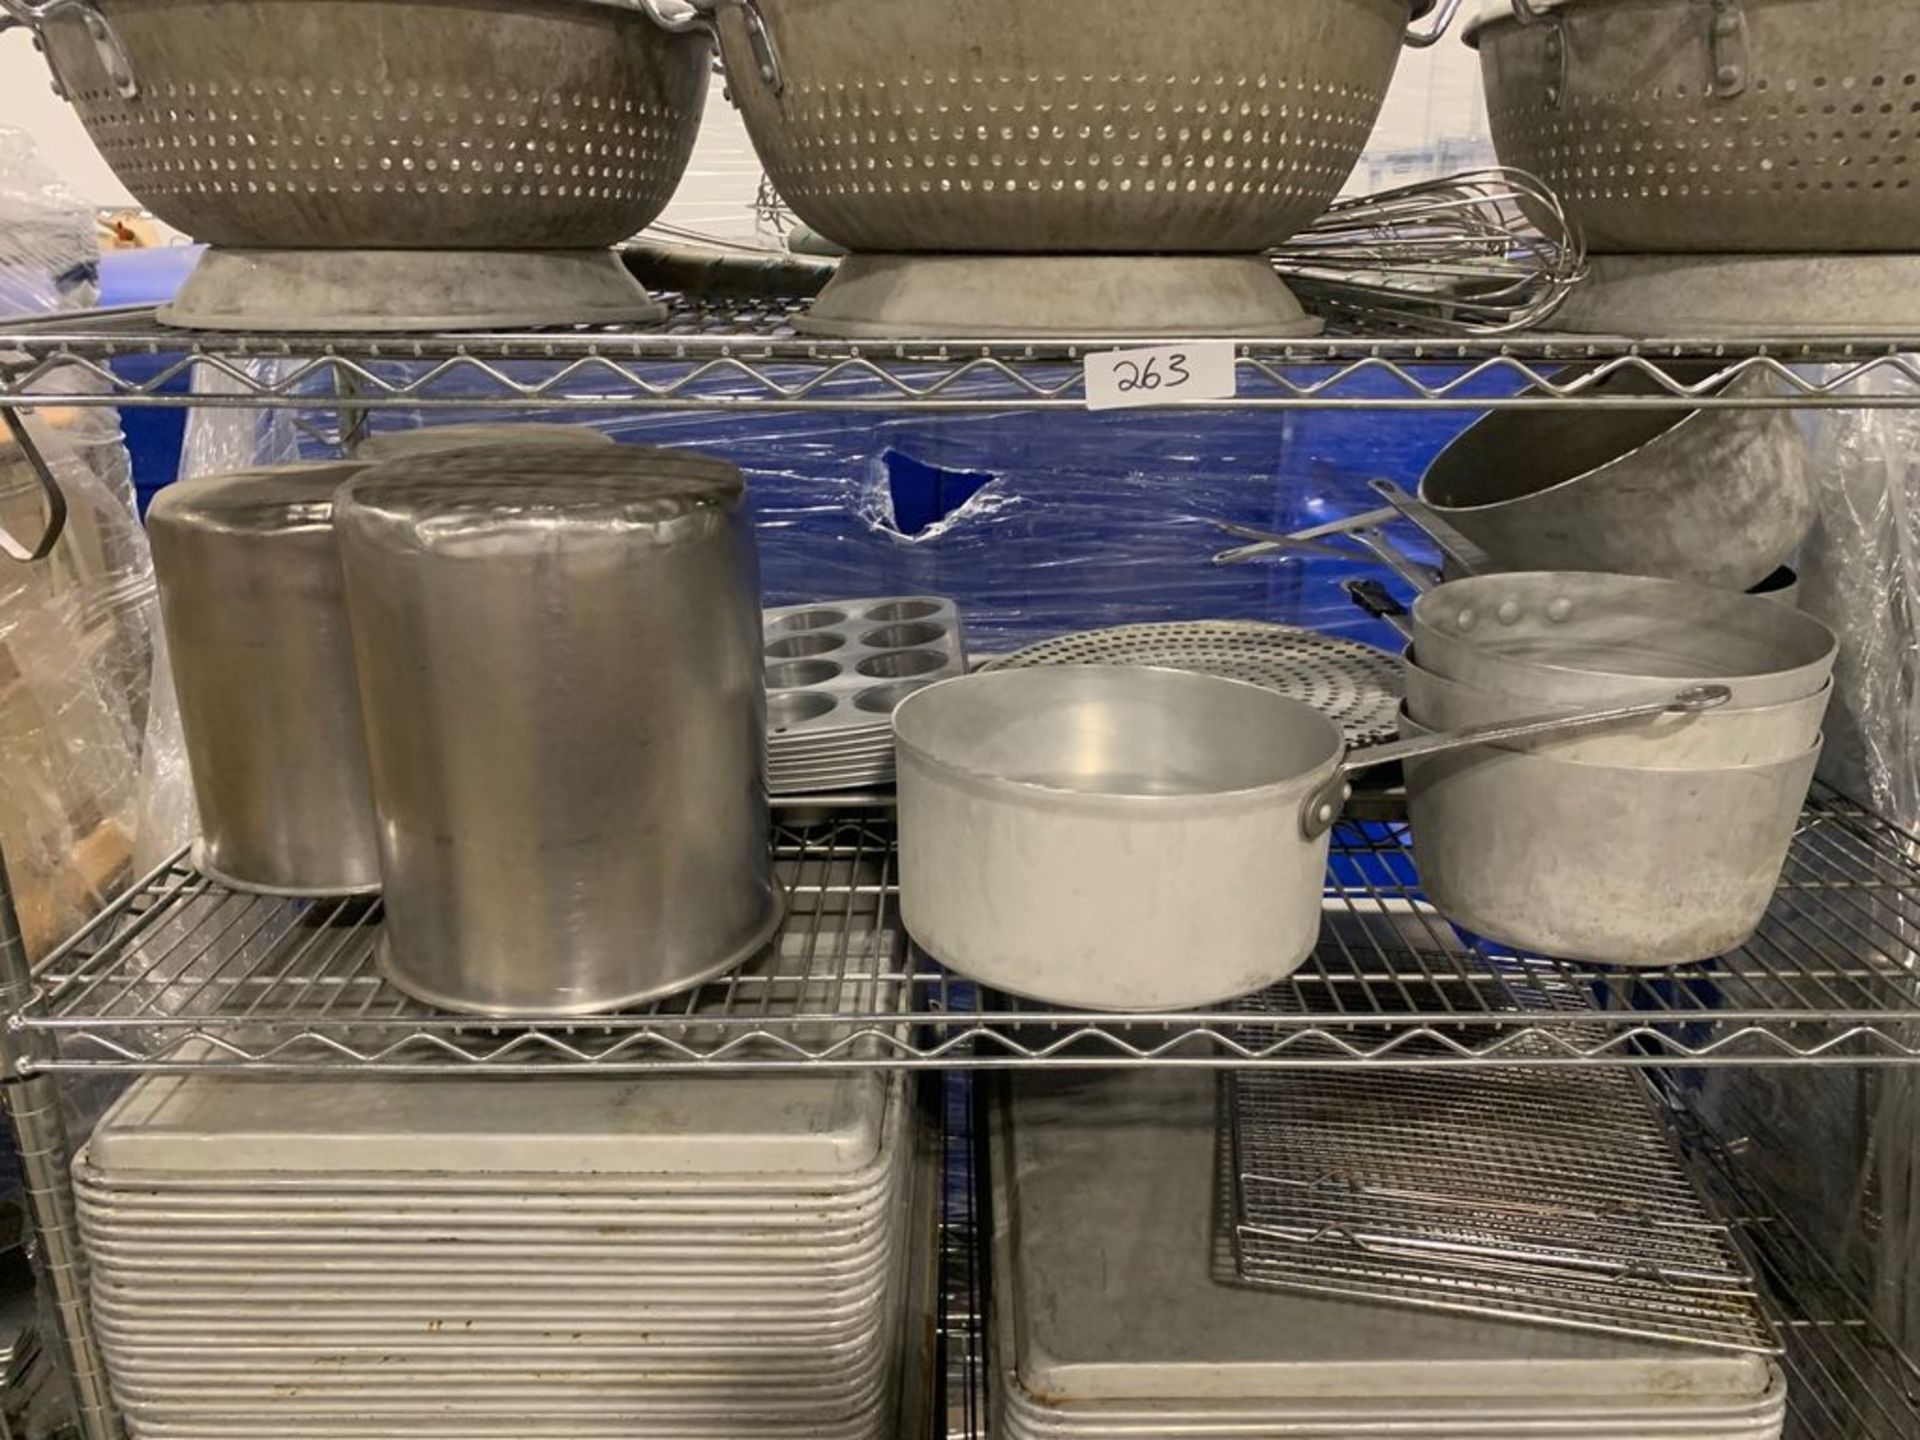 BAKING SUPPLIES, PANS, BOWLS, POTS , ROLLING CART INCLUDED - Image 5 of 5